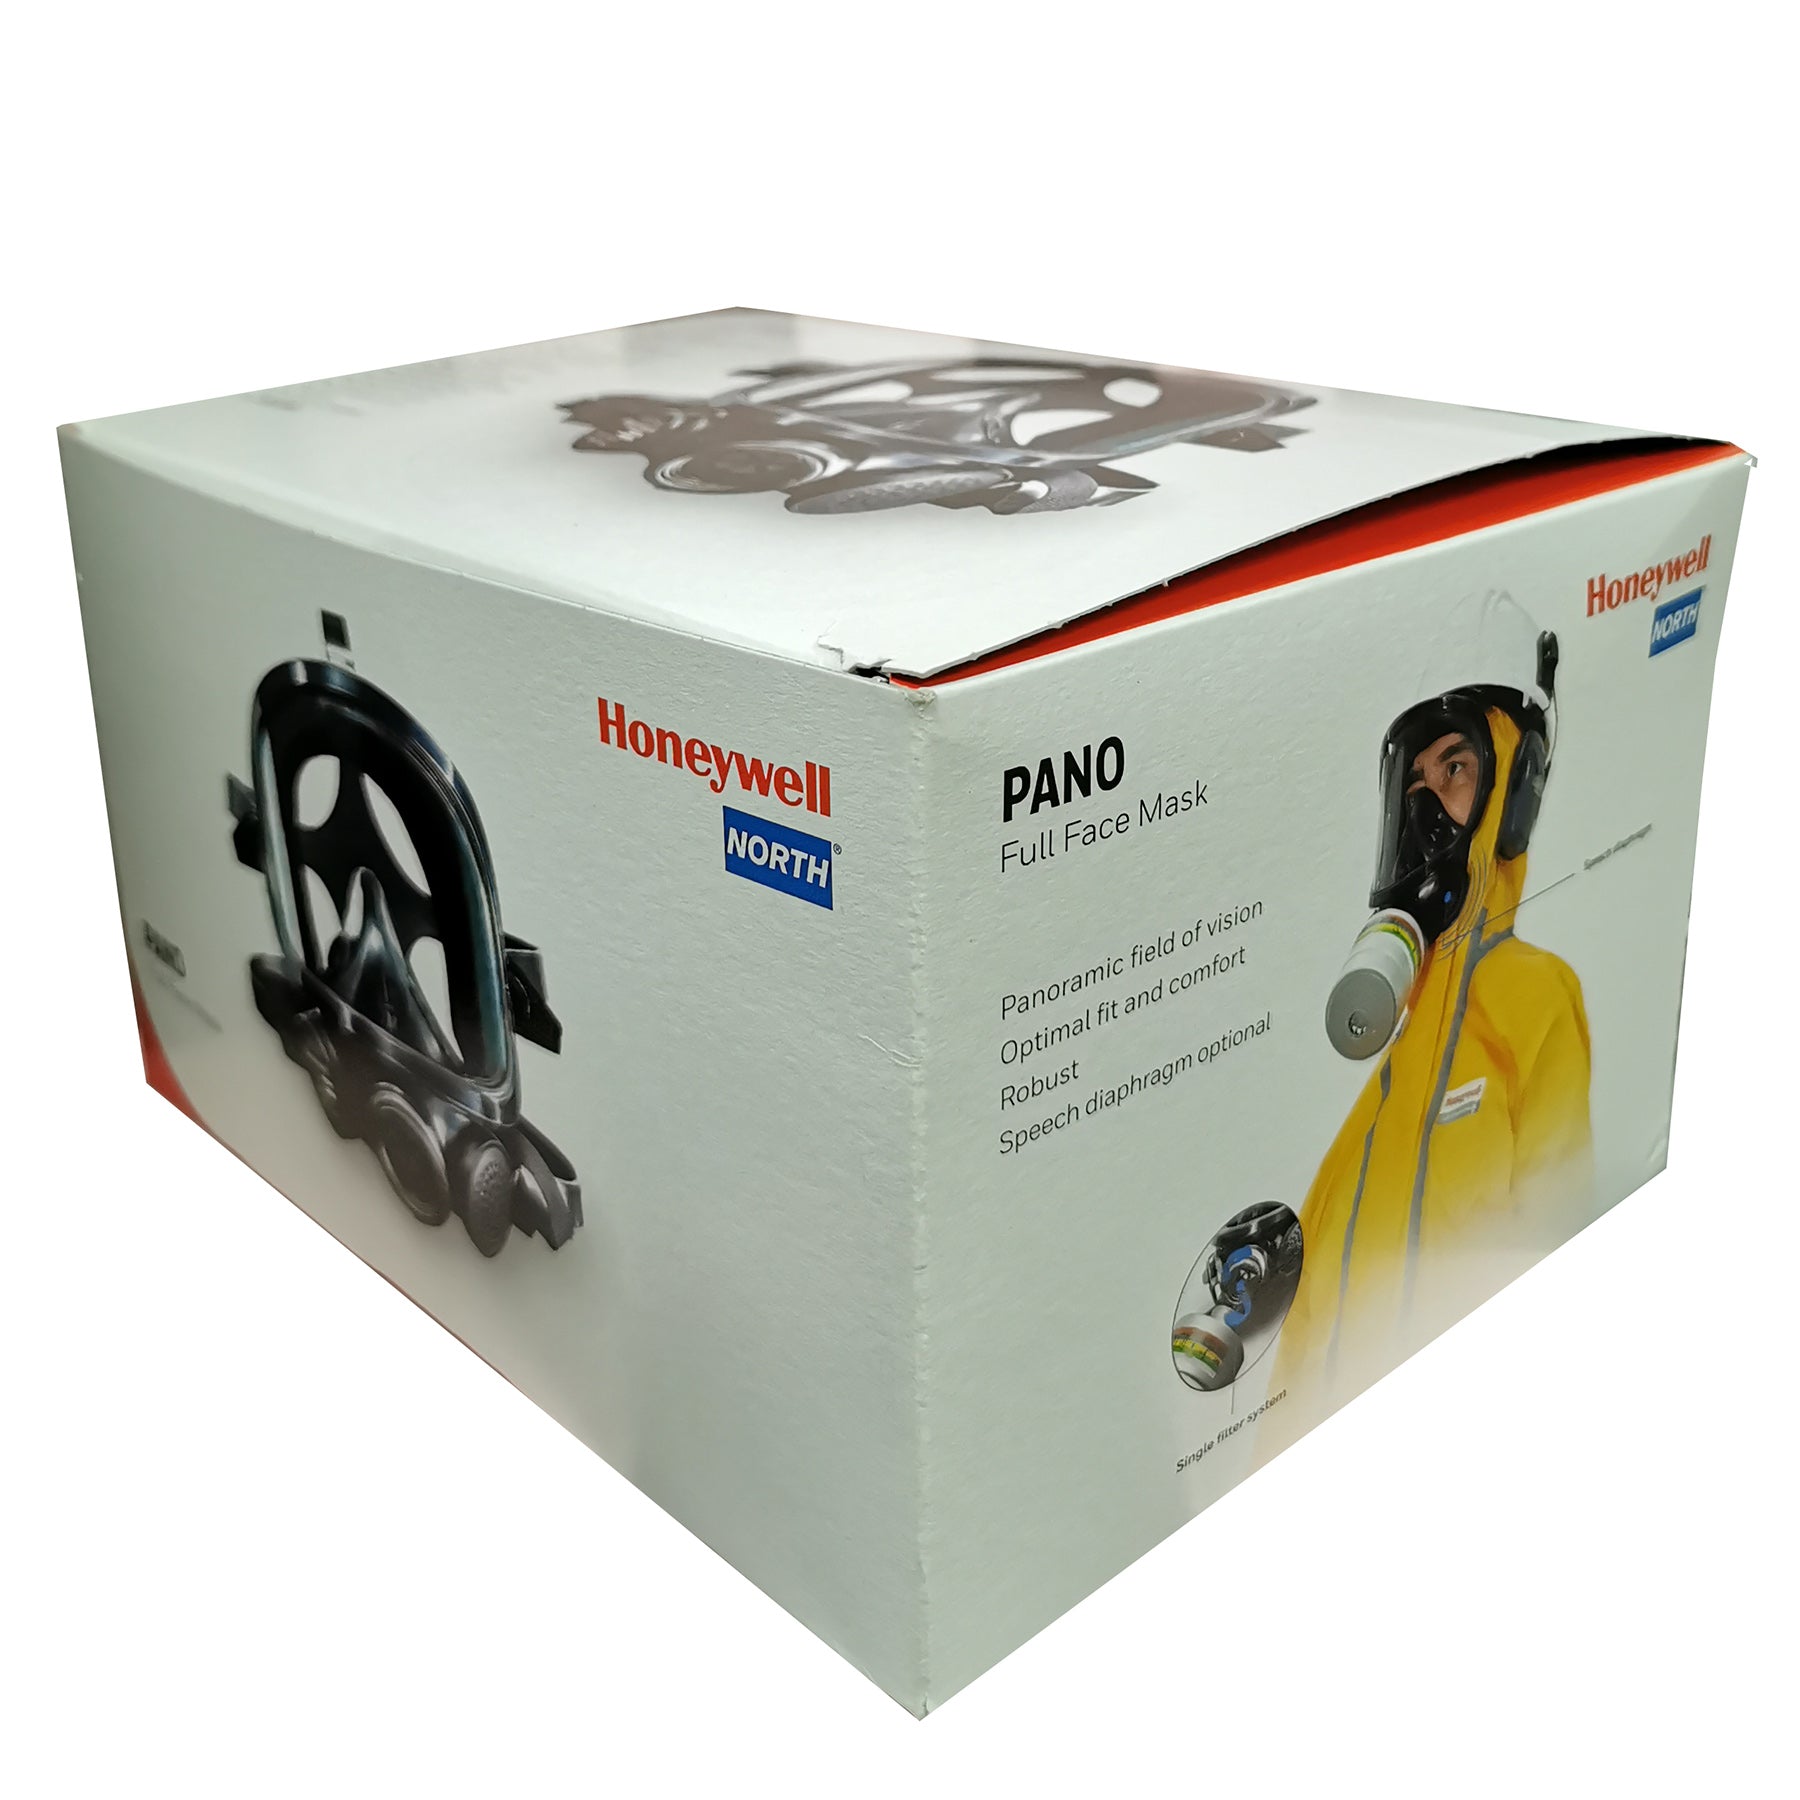 Honeywell 1710395 Panoramasque Full Face Respirator Masks - Sold Without Filters